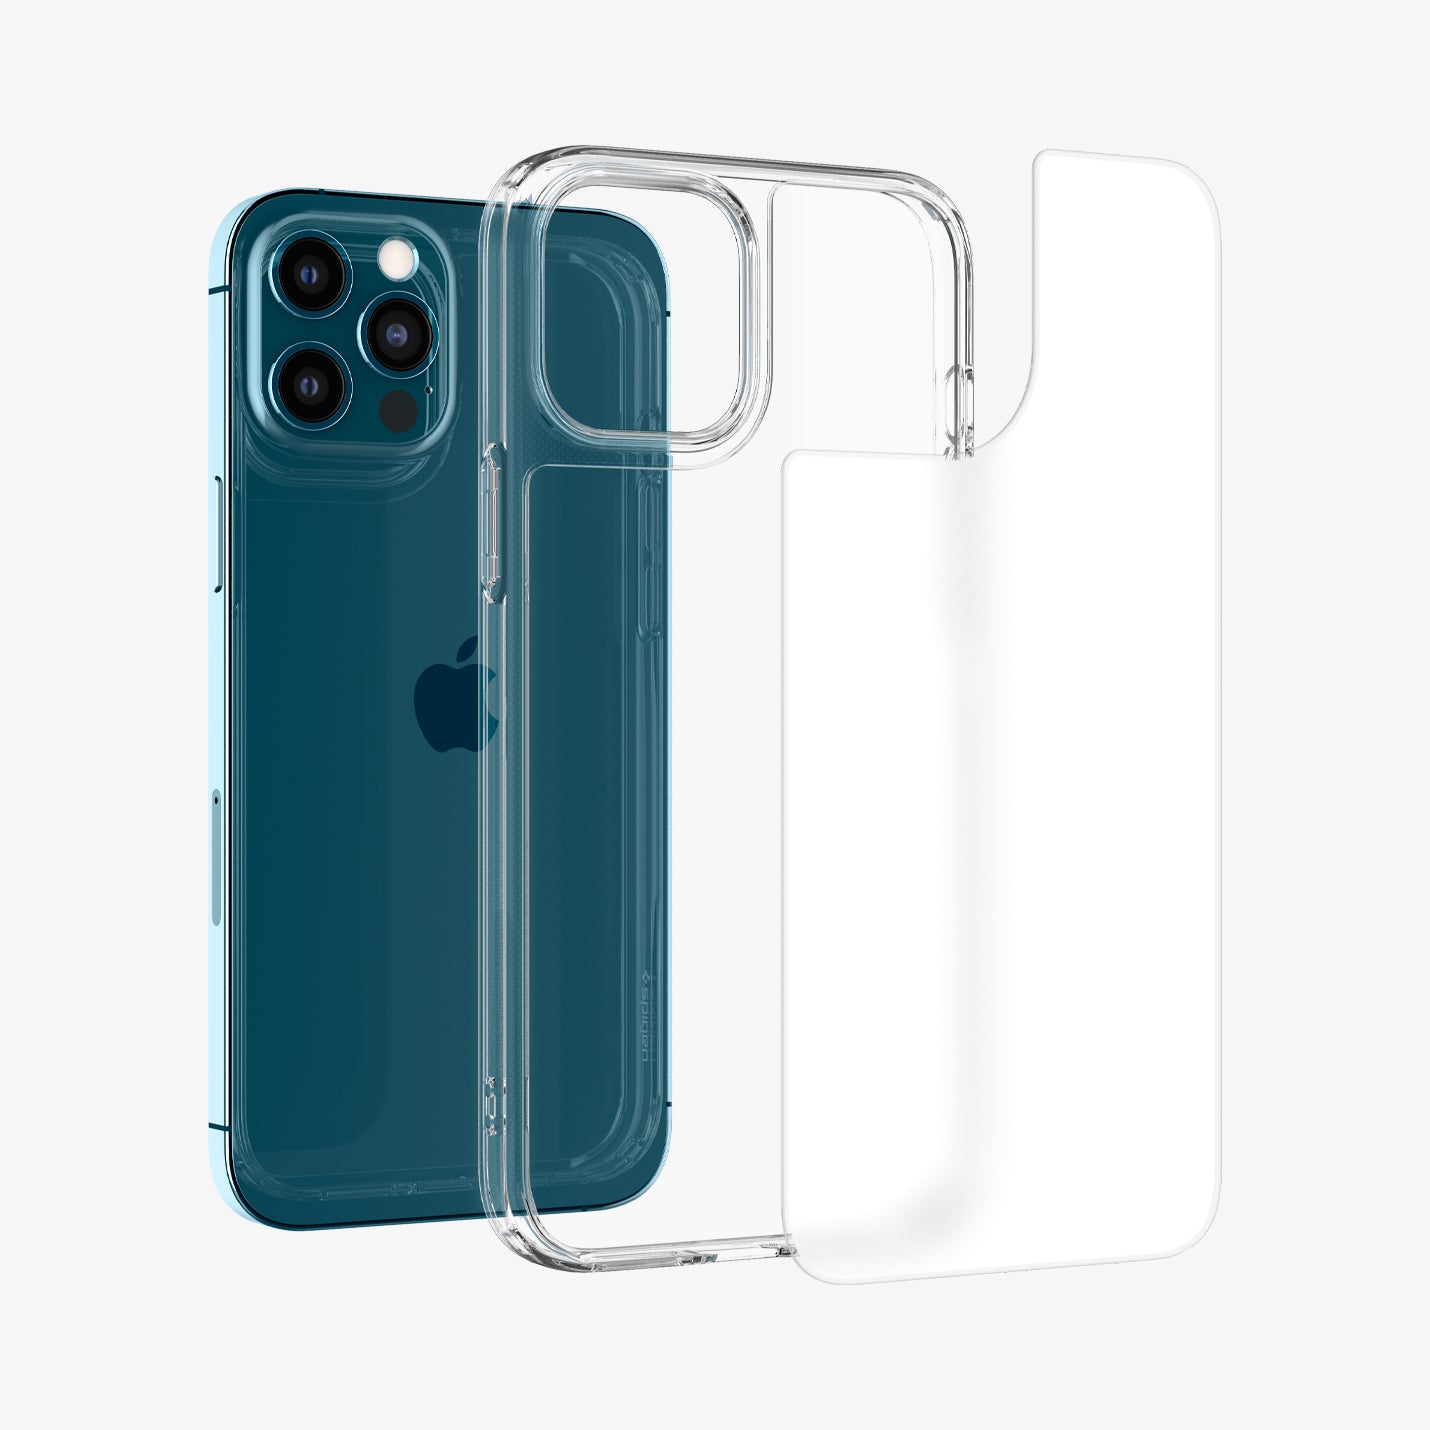 ACS02600 - iPhone 12 Pro Max Case Quartz Hybrid in matte clear showing the multiple layers of case hovering away from device